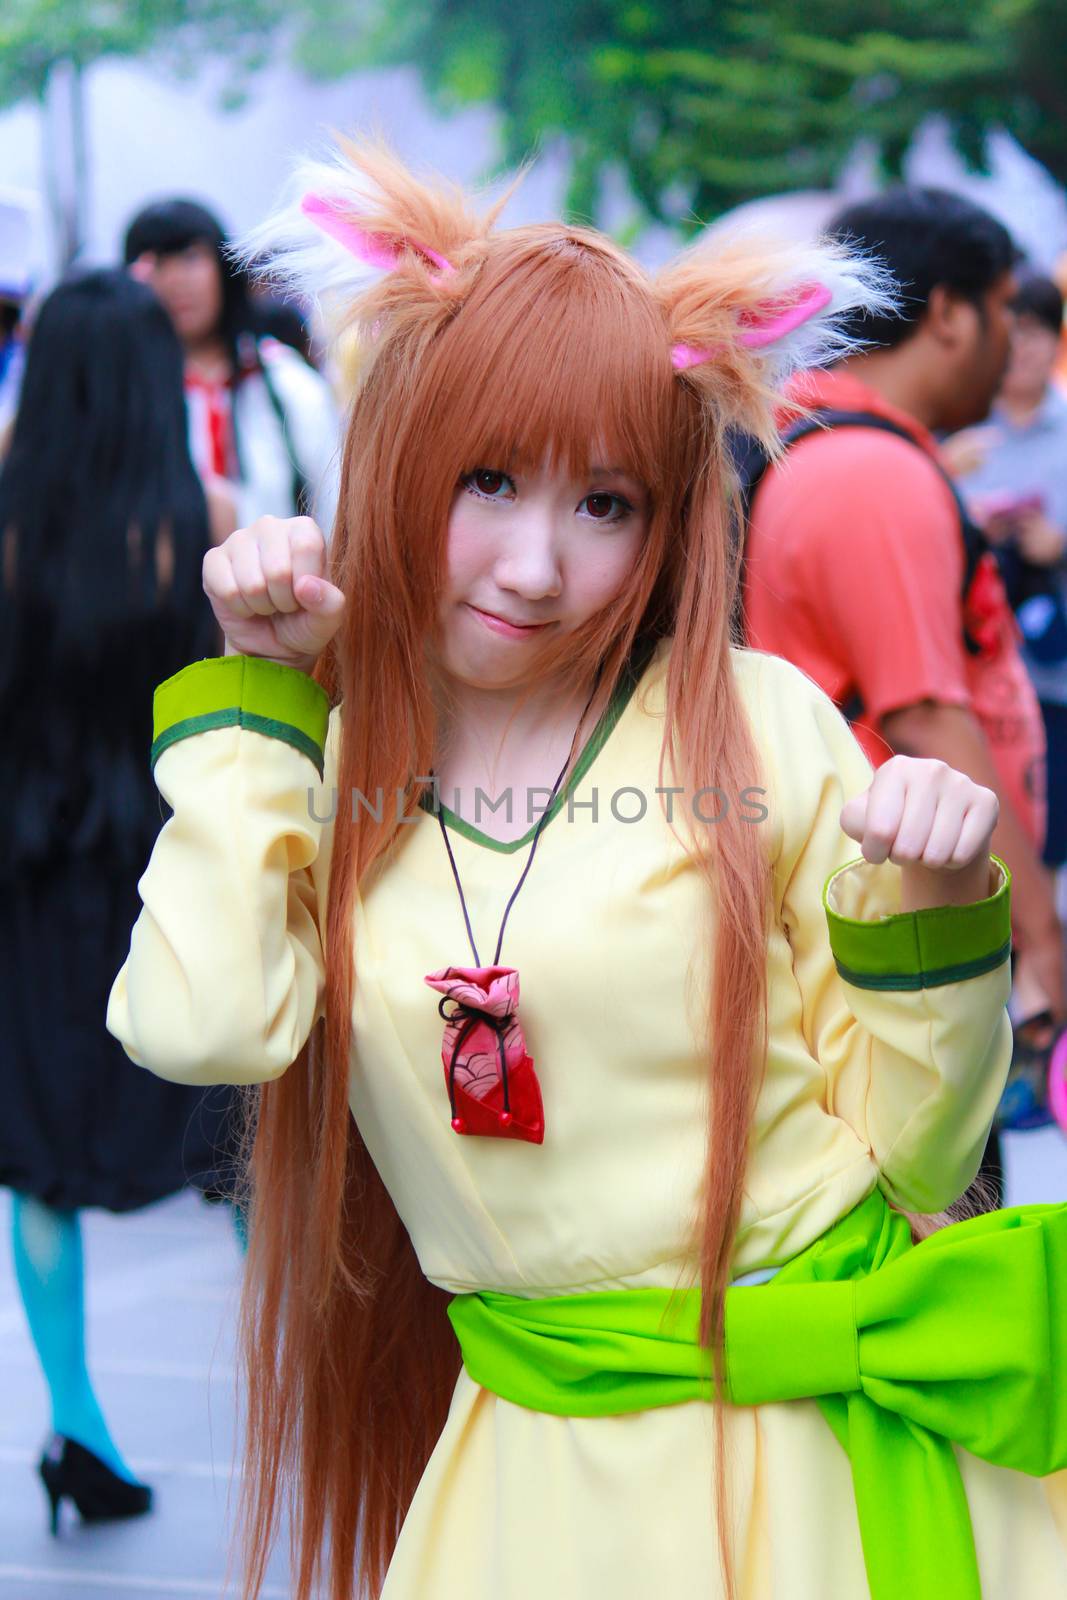 Bangkok - Aug 31: An unidentified Japanese anime cosplay pose  on August 31, 2014 at Central World, Bangkok, Thailand.